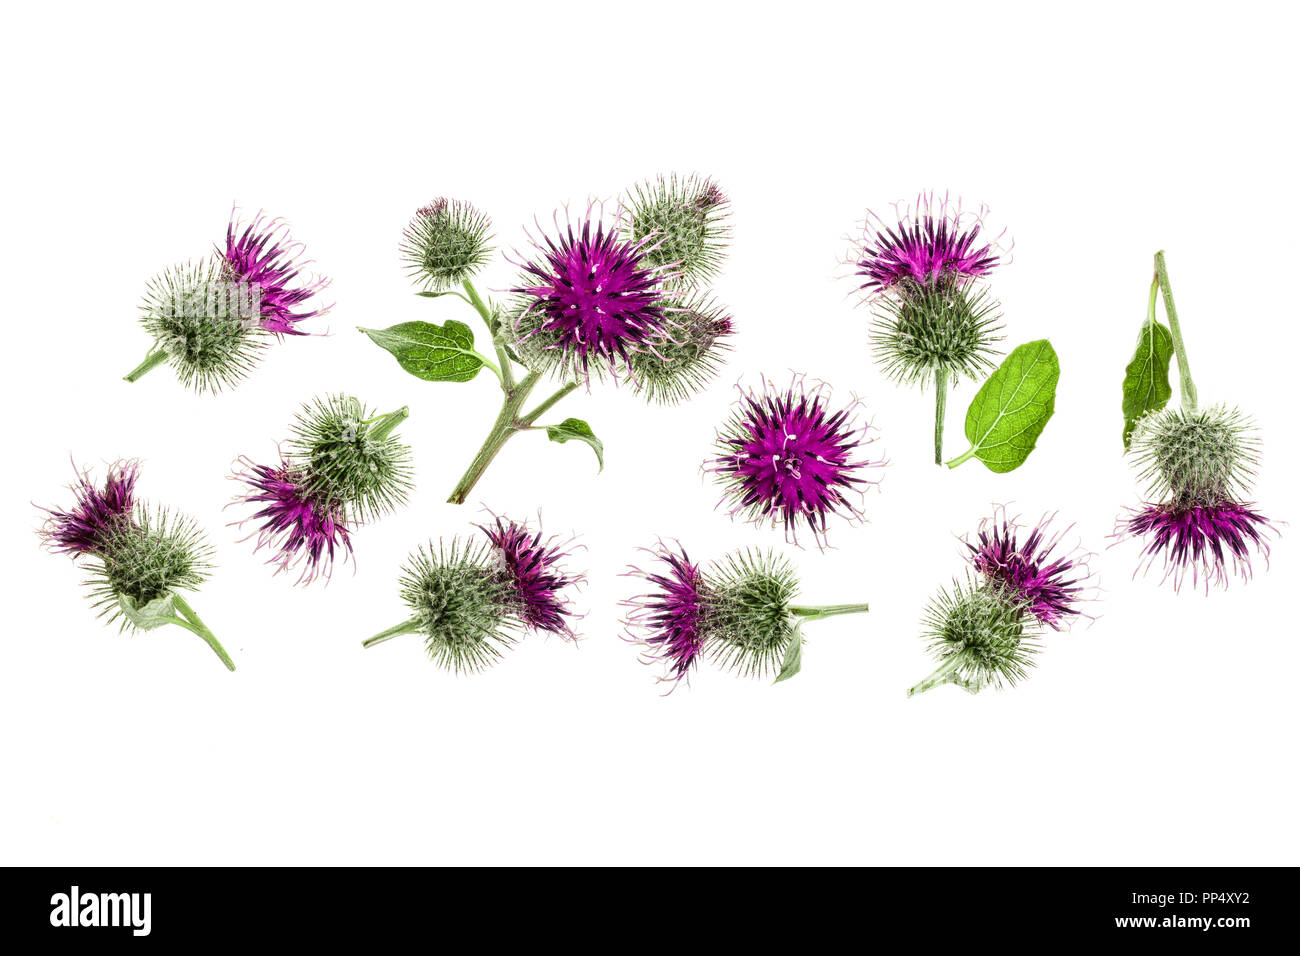 Burdock flower isolated on white background with copy space for your text. Medicinal plant: Arctium. Top view. Flat lay pattern Stock Photo